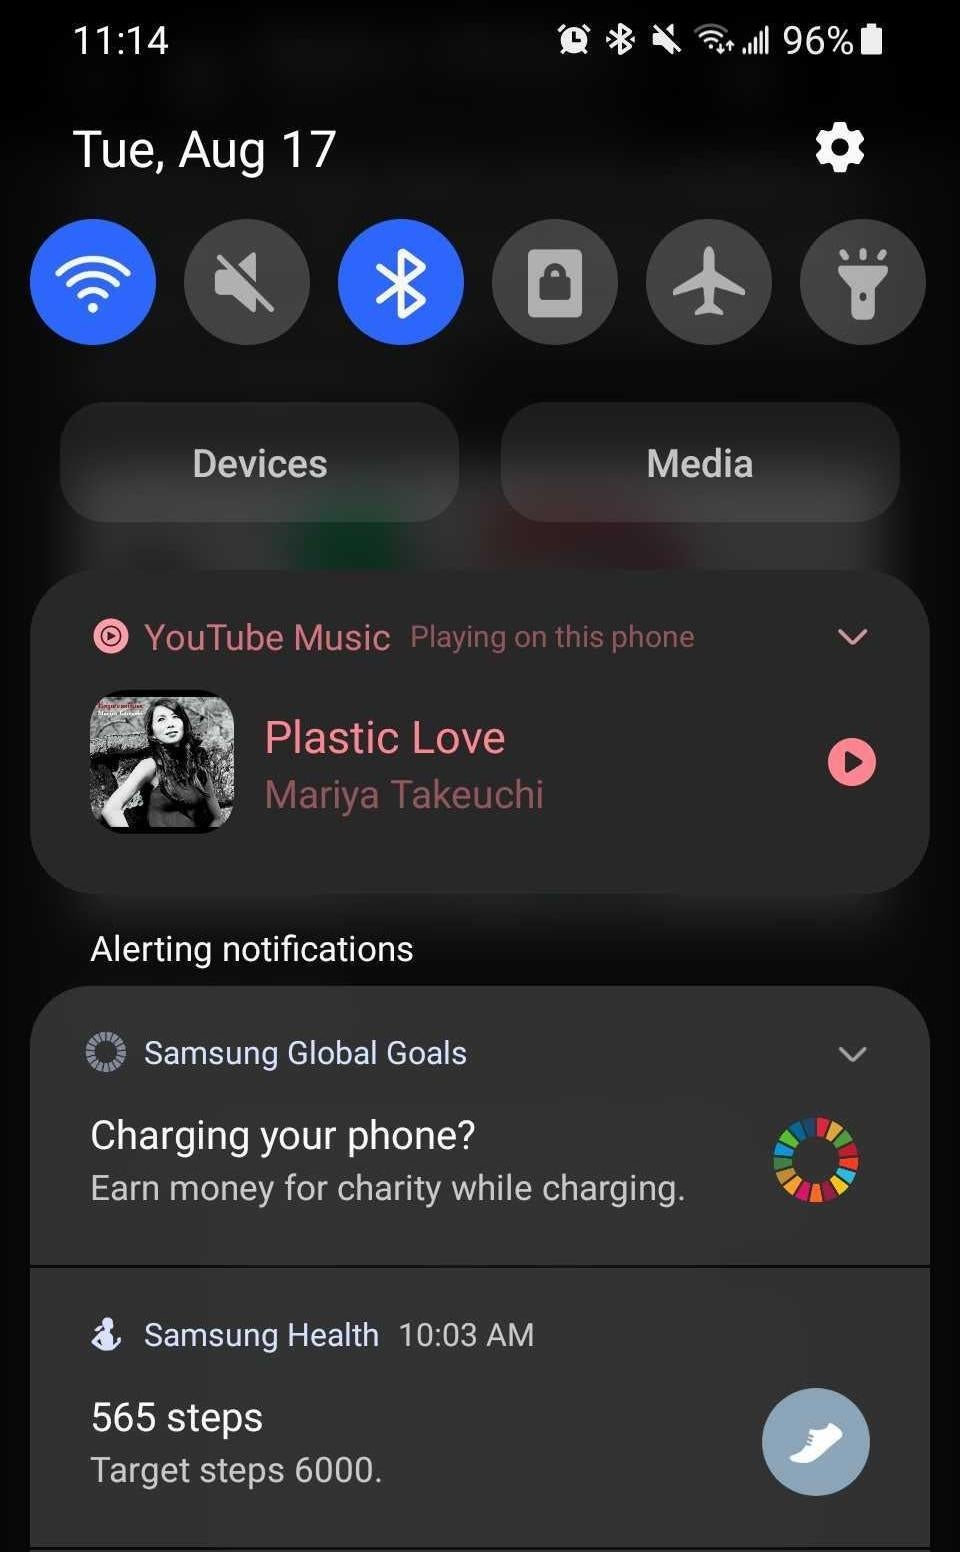 While they might not be classified as typical ads, notifications for apps like Samsung Global Goals can still get kind of annoying.  (Screenshot: Sam Rutherford)